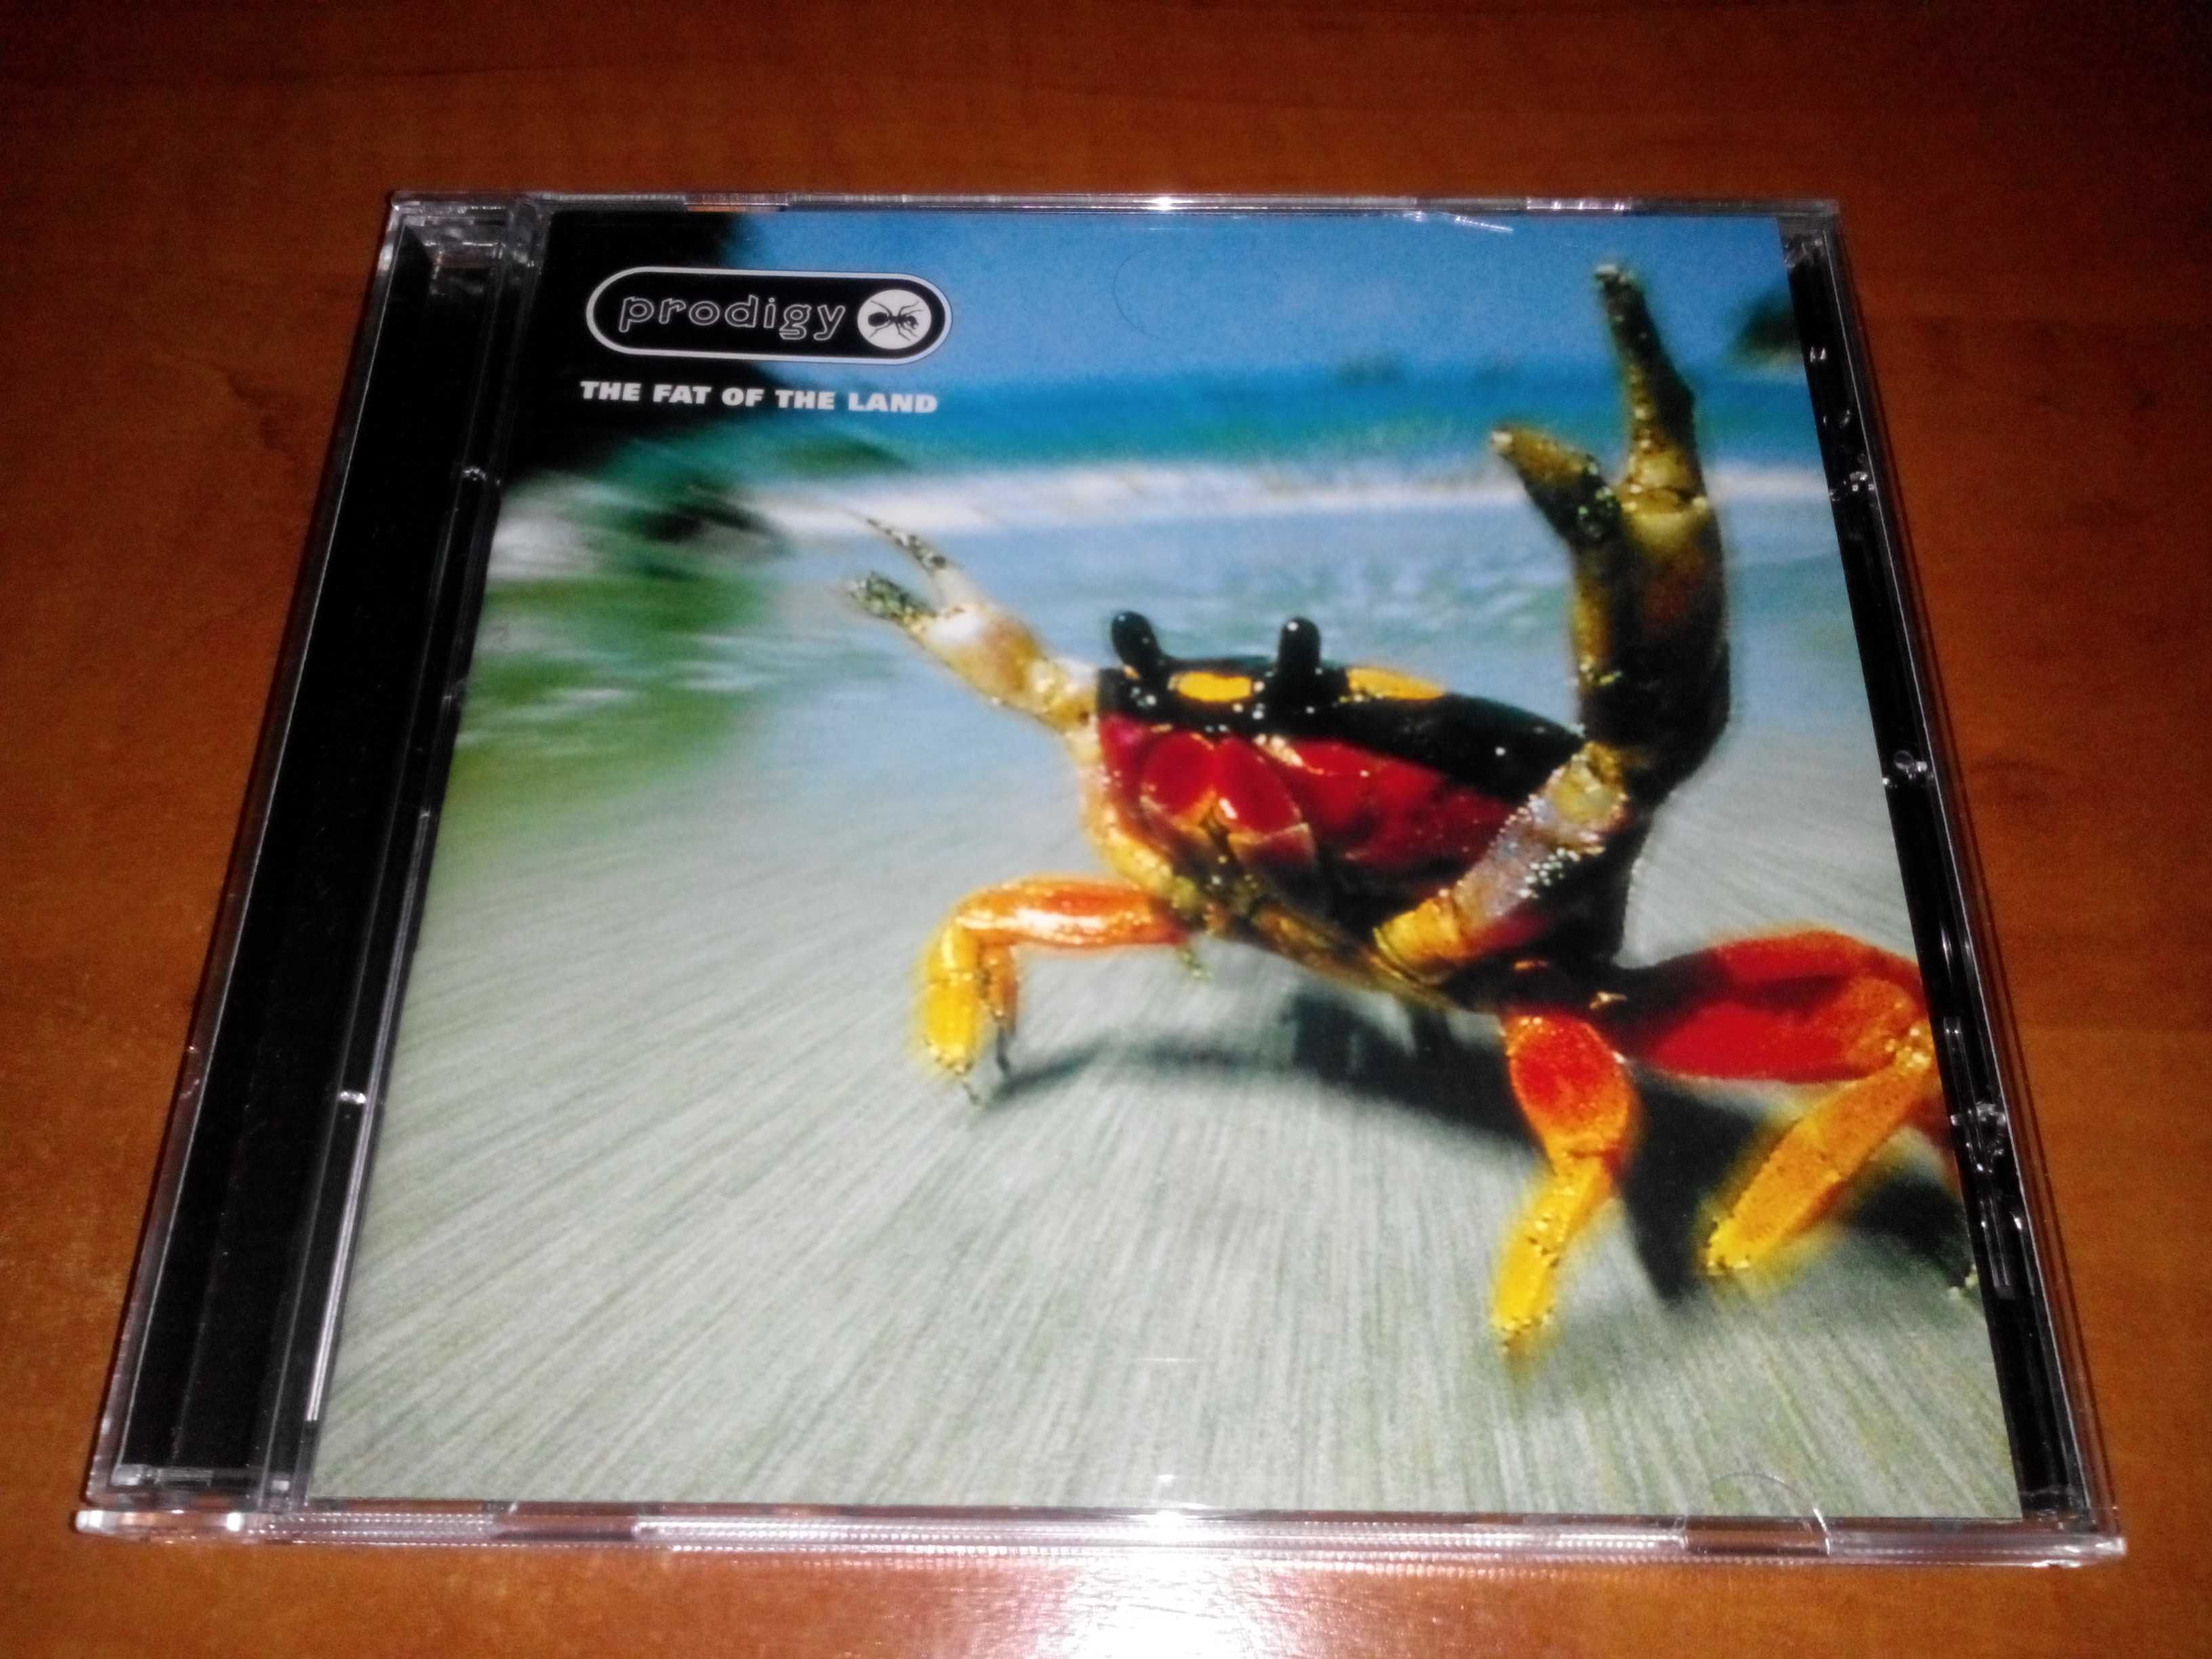 Cd "The Fat of the Land" de Prodigy